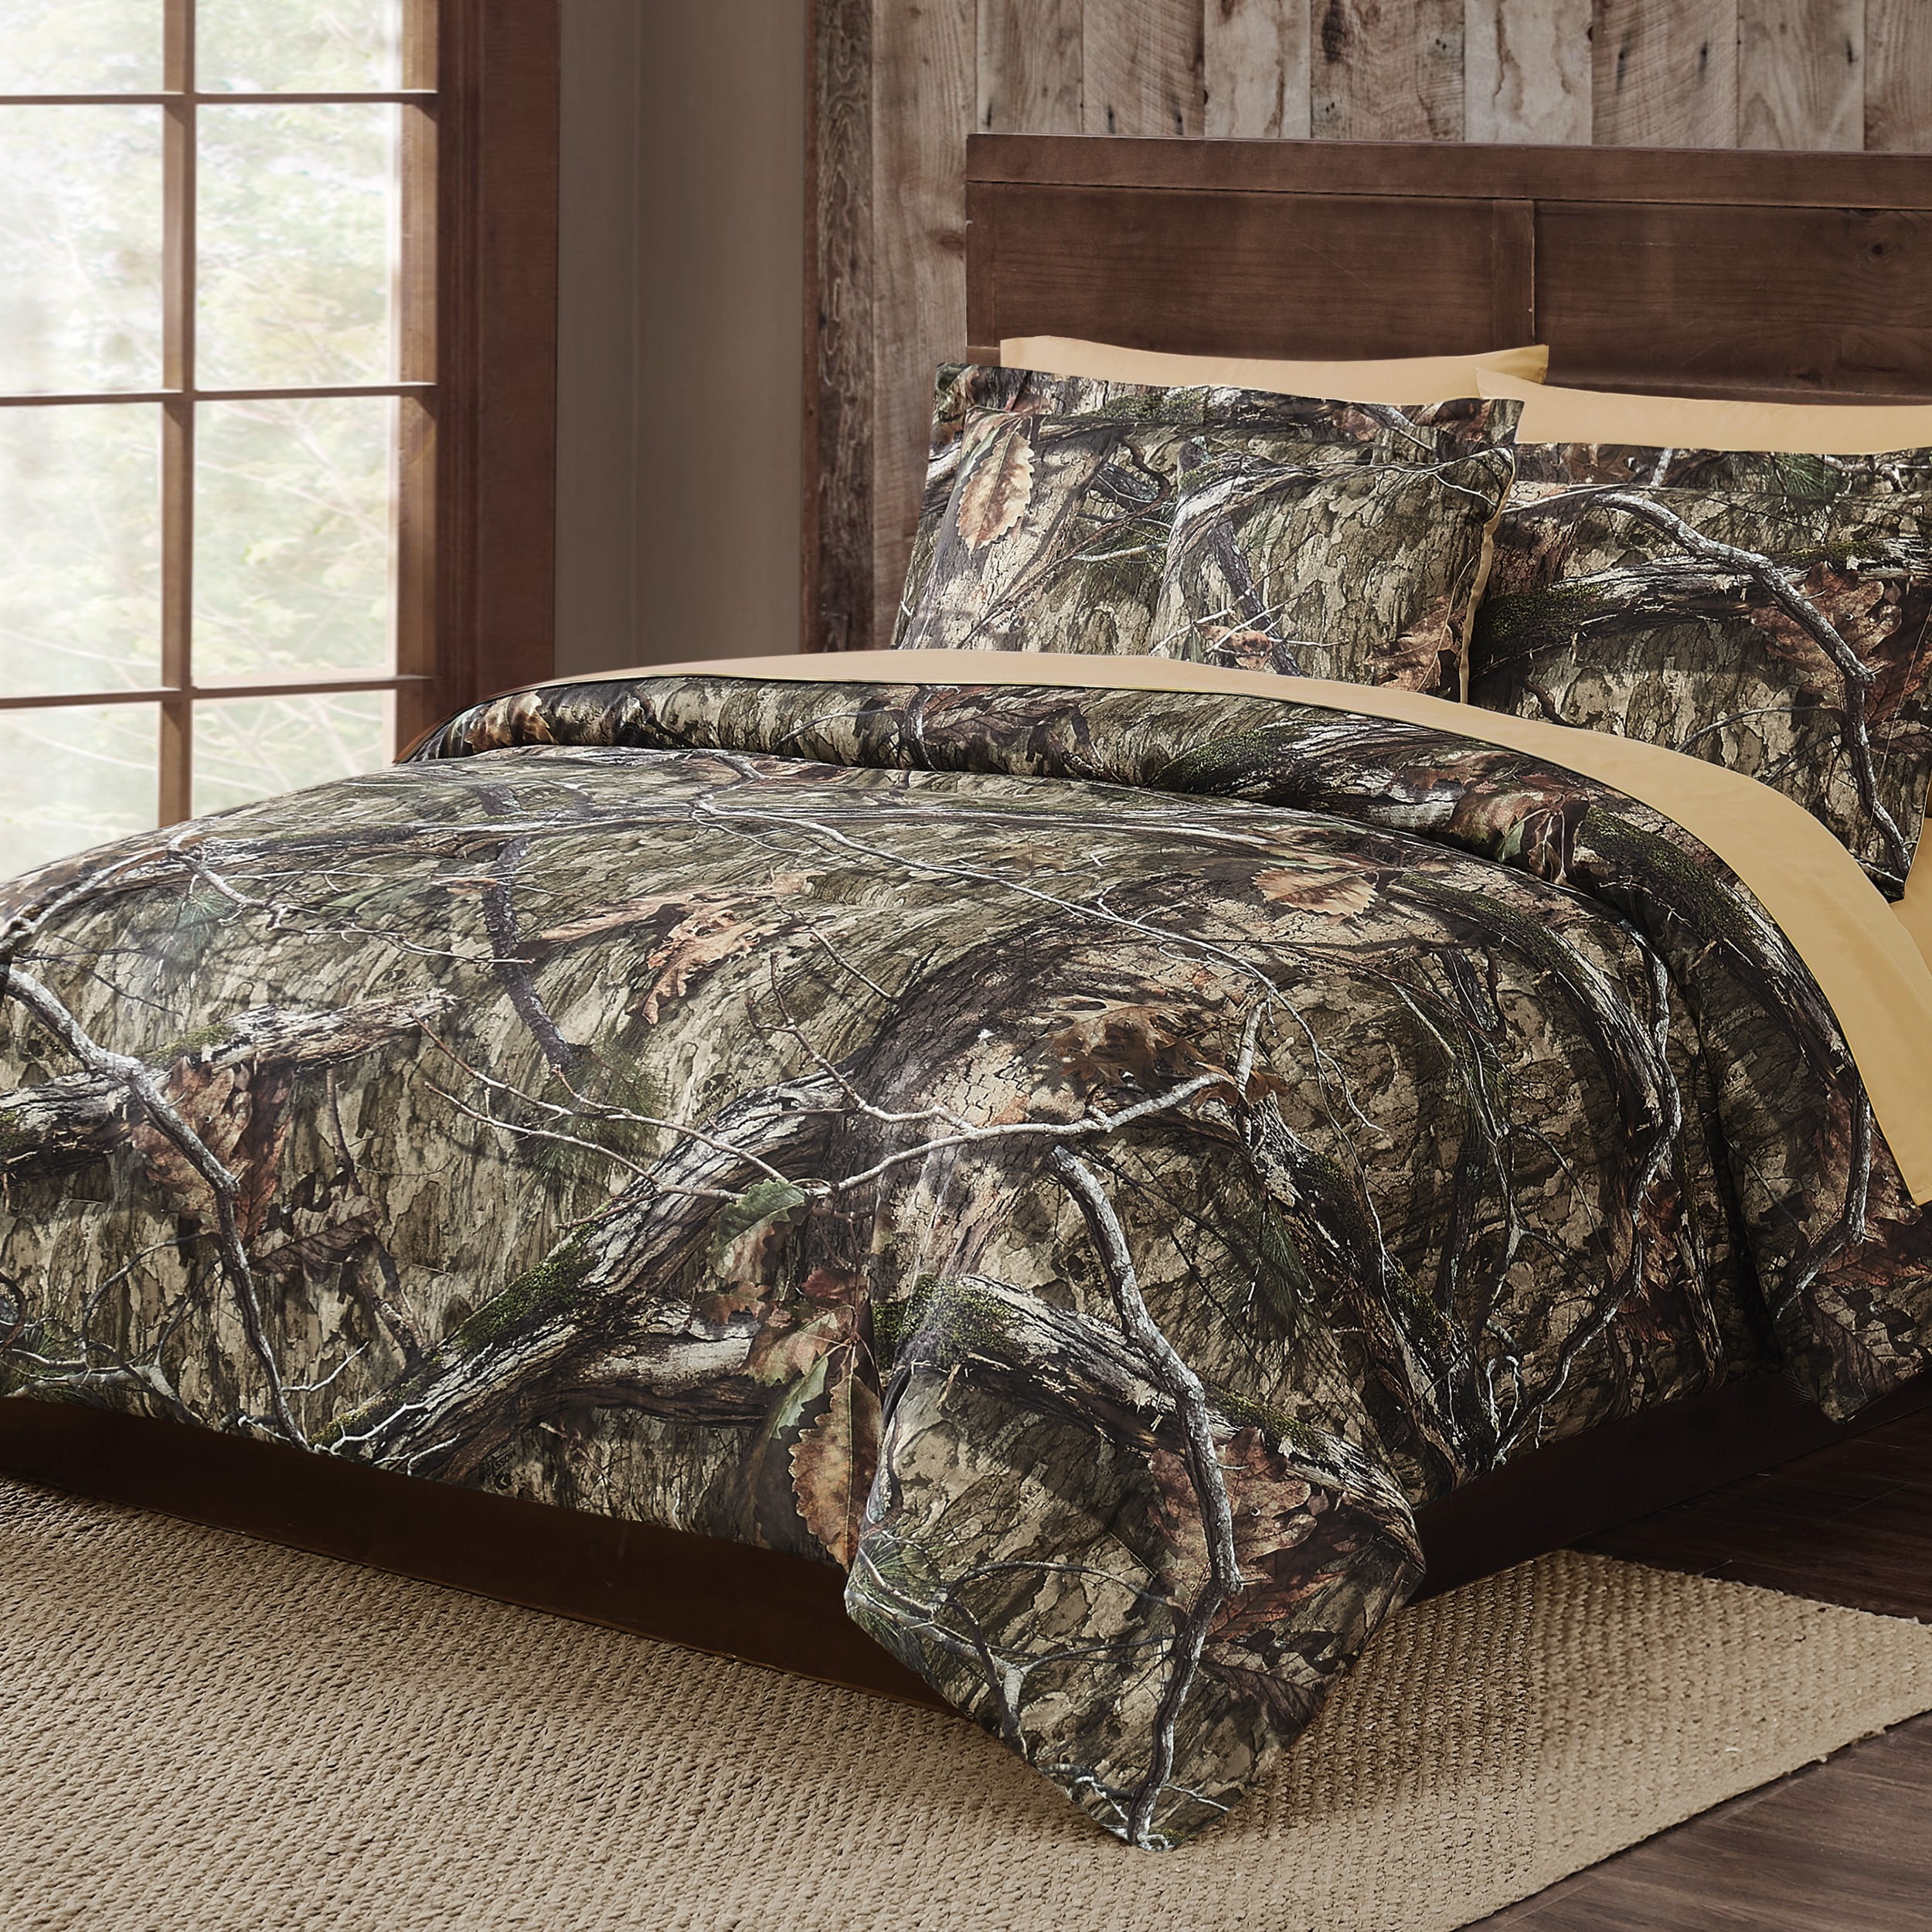 22 PC ORANGE CAMO! COMFORTER SHEET KING SIZE WITH CURTAINS CAMOUFLAGE SET 